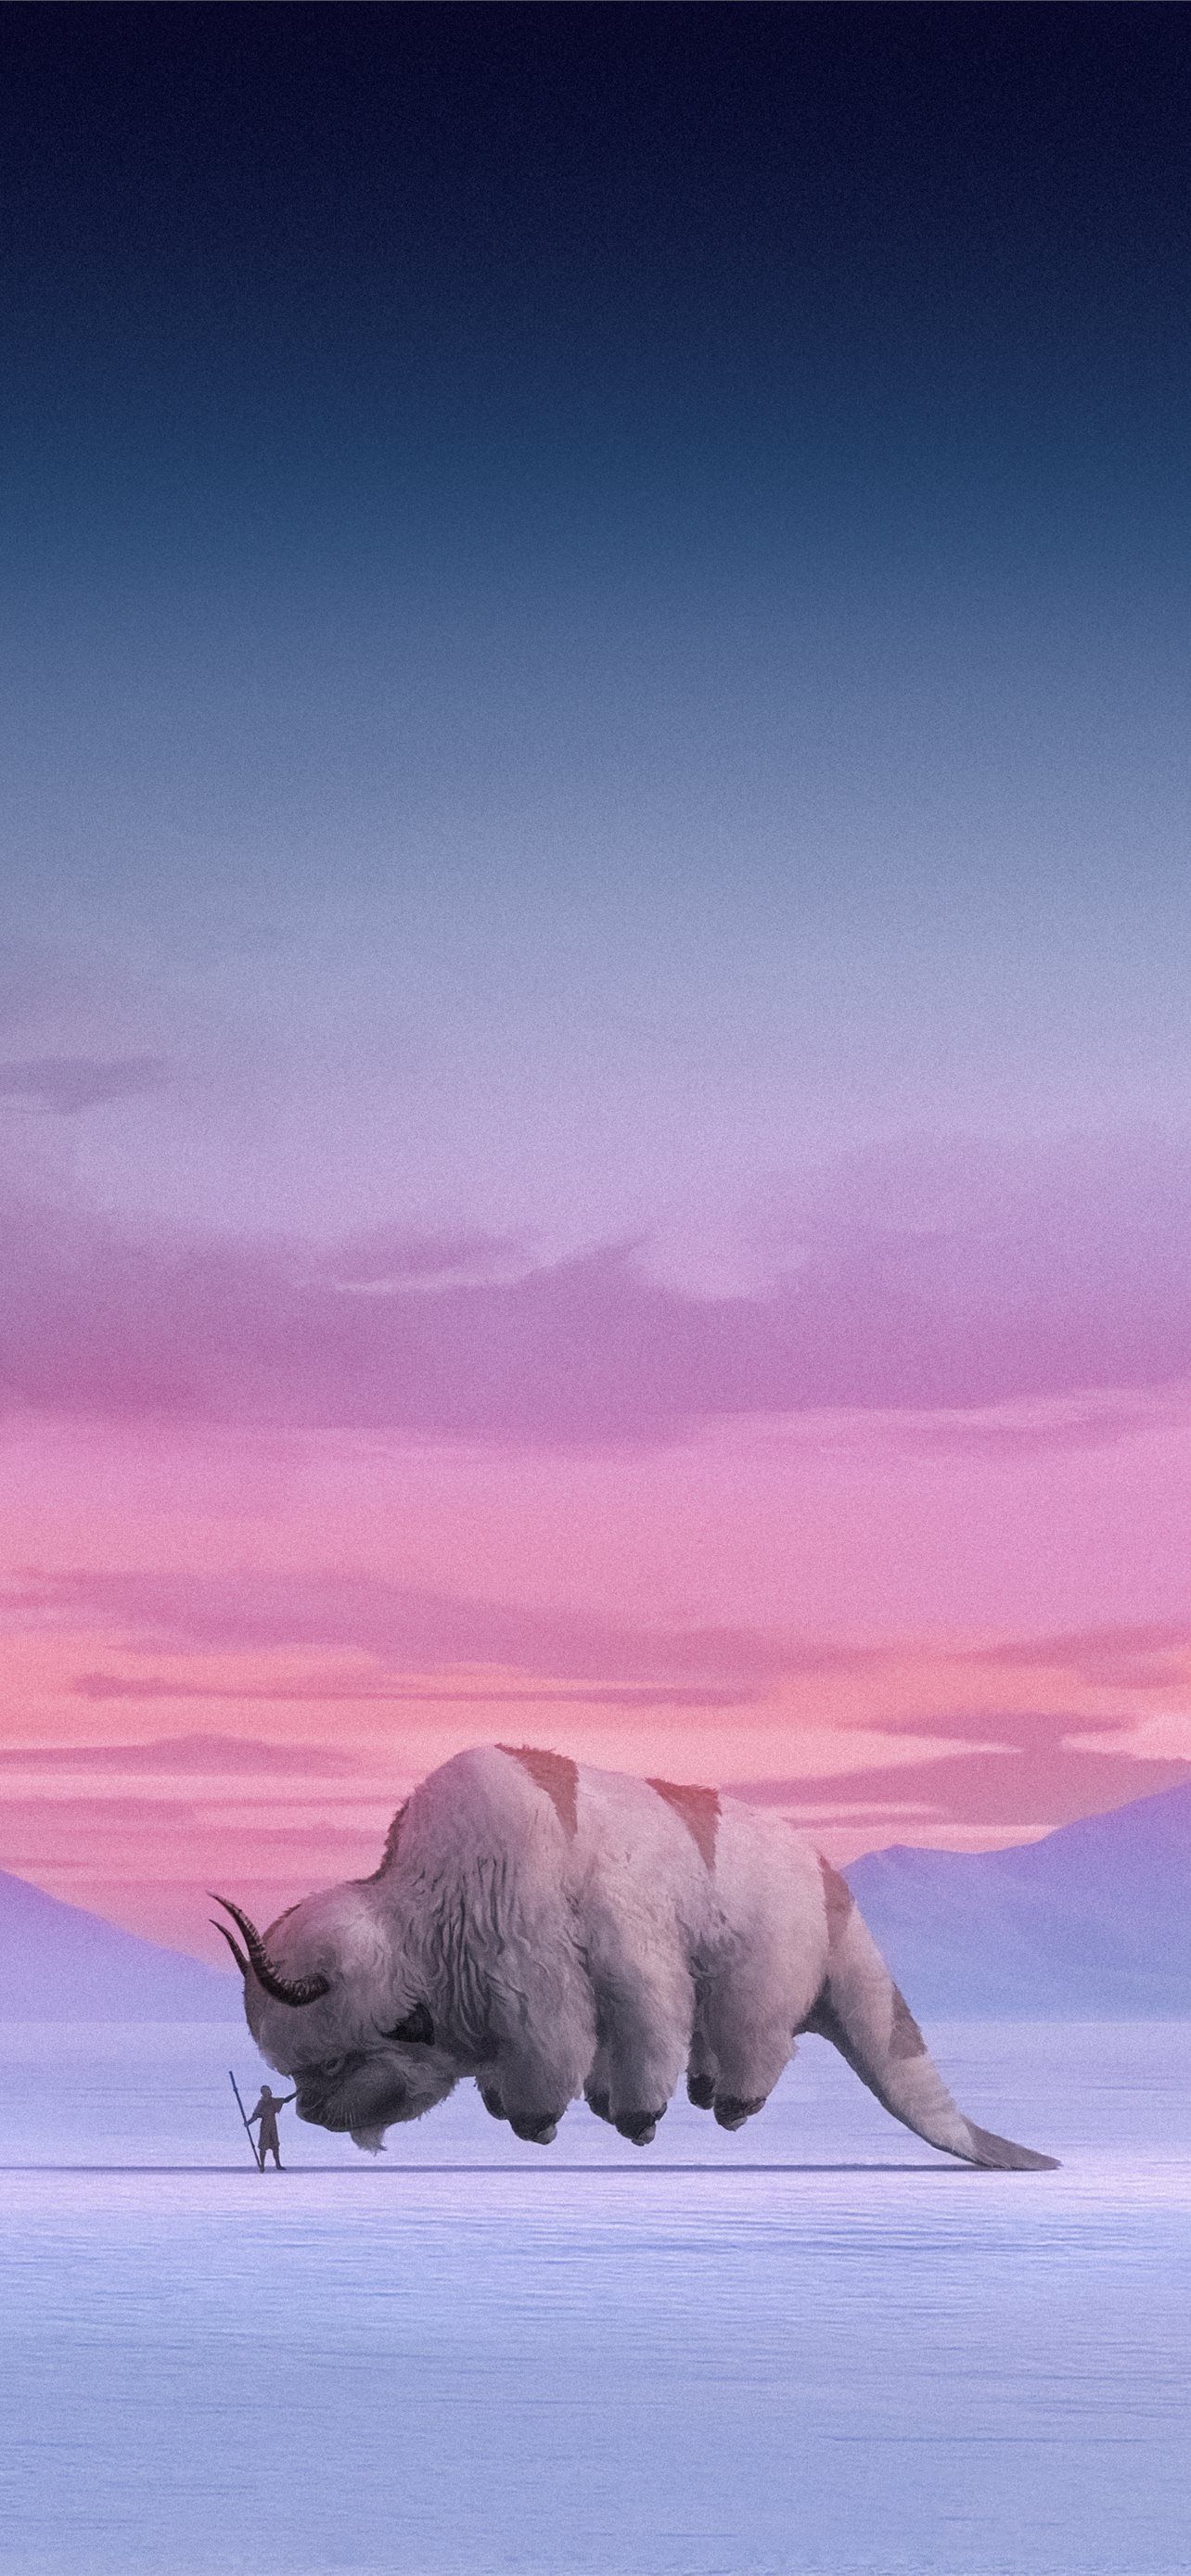 Picture of a white bison with a pink sky in the background - IPhone